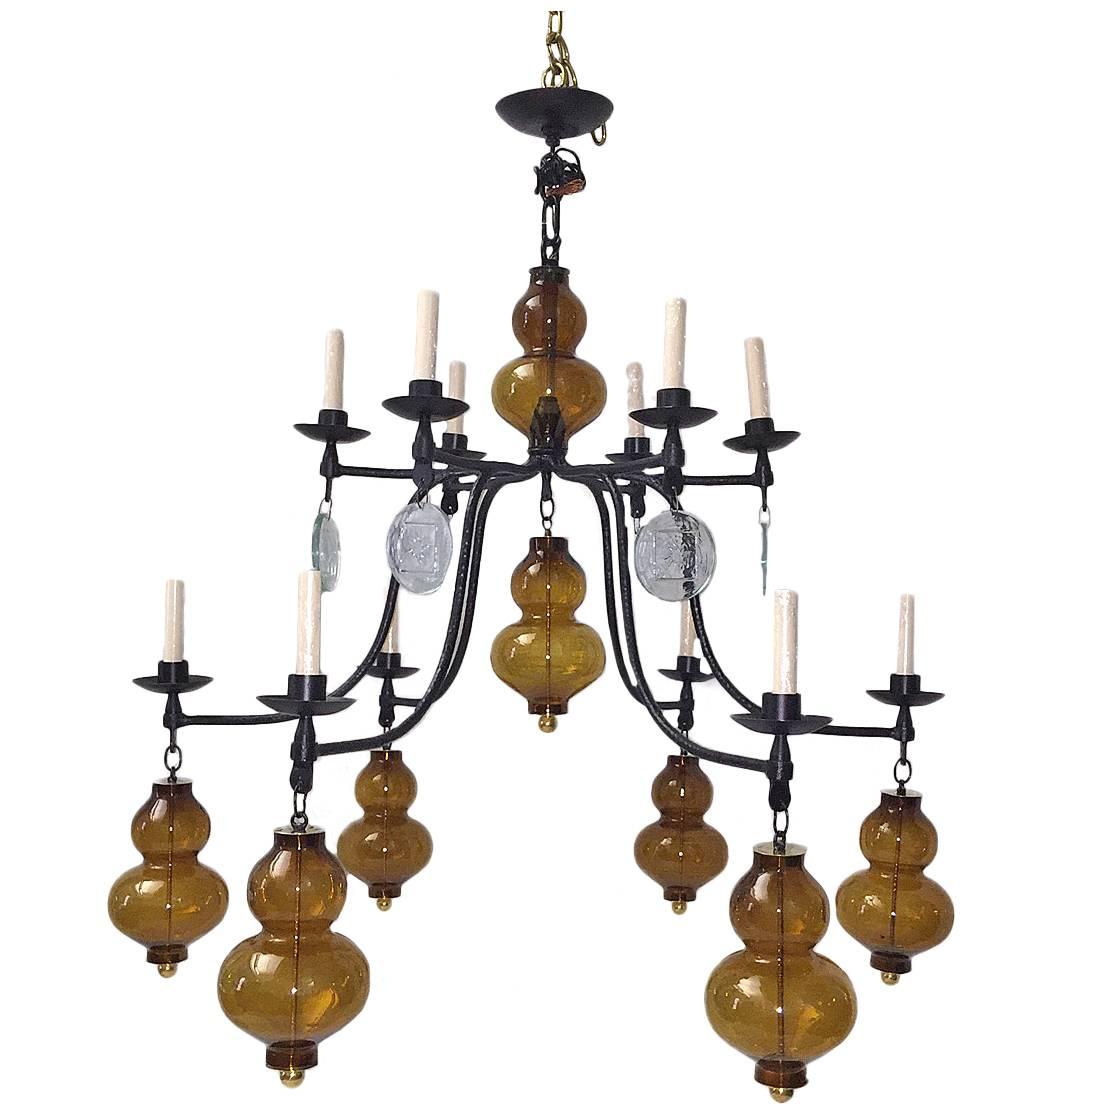 Large Wrought Iron Chandelier with Glass Elements